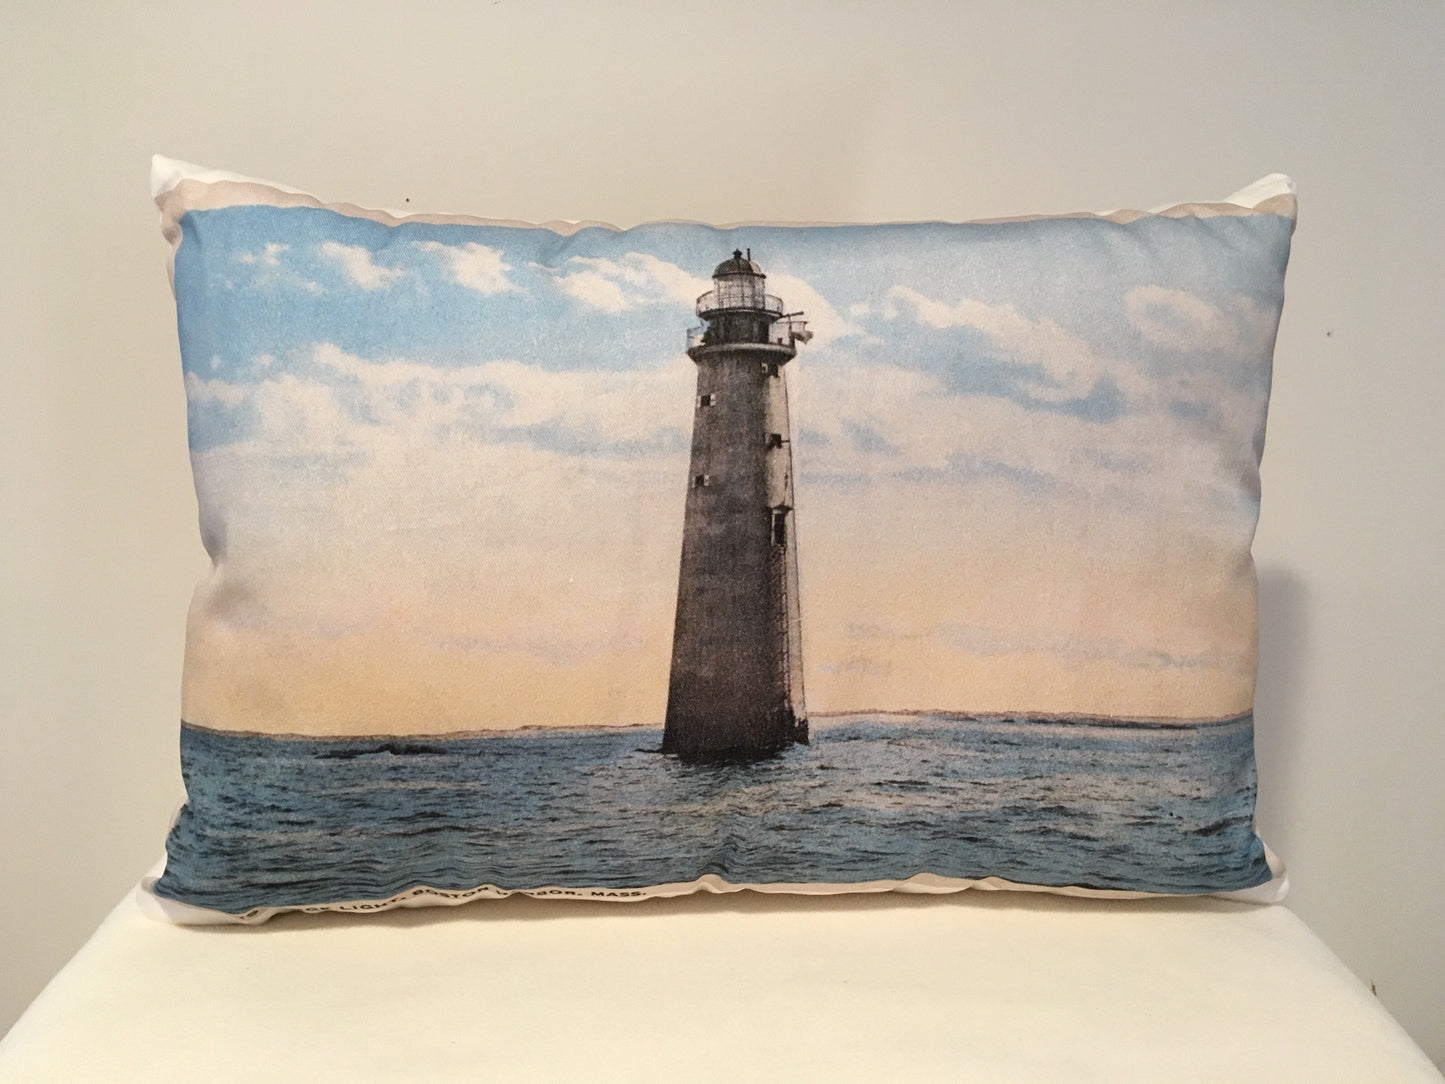 Colorful Cotton Twill Pillow Of Minot Light in Massachusetts Bay - That Fabled Shore Home Decor